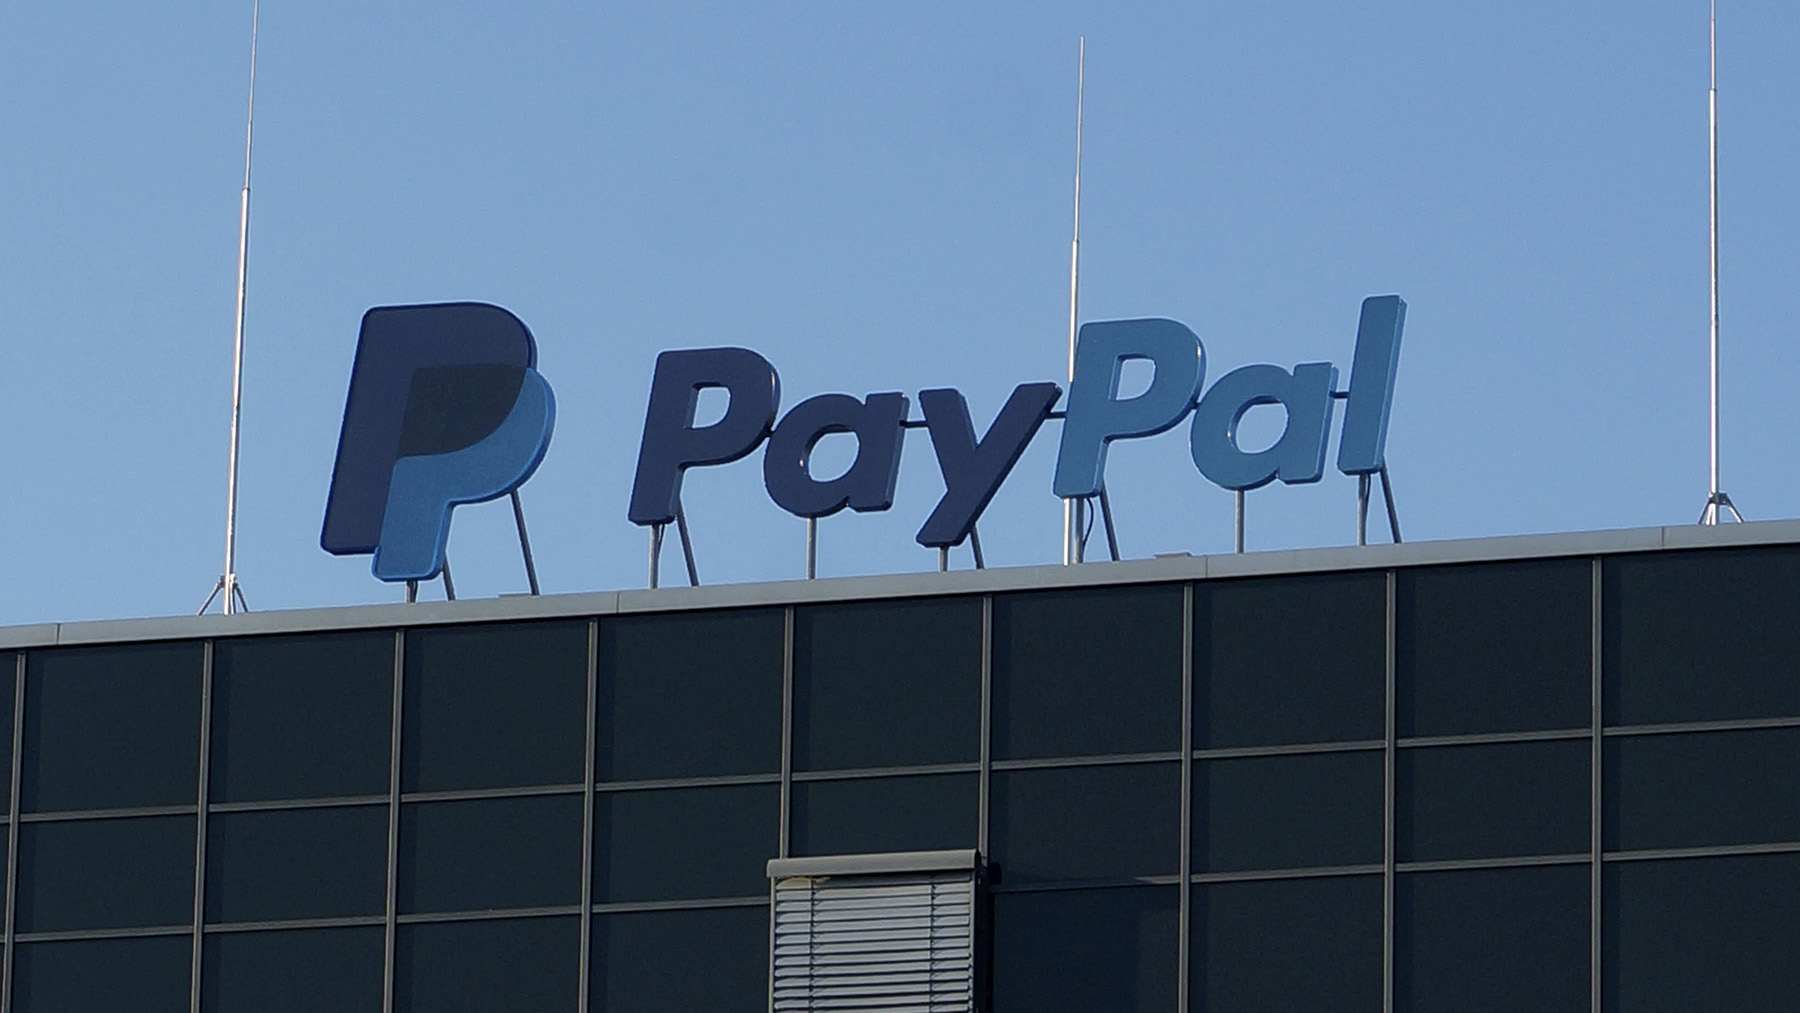   paypal     